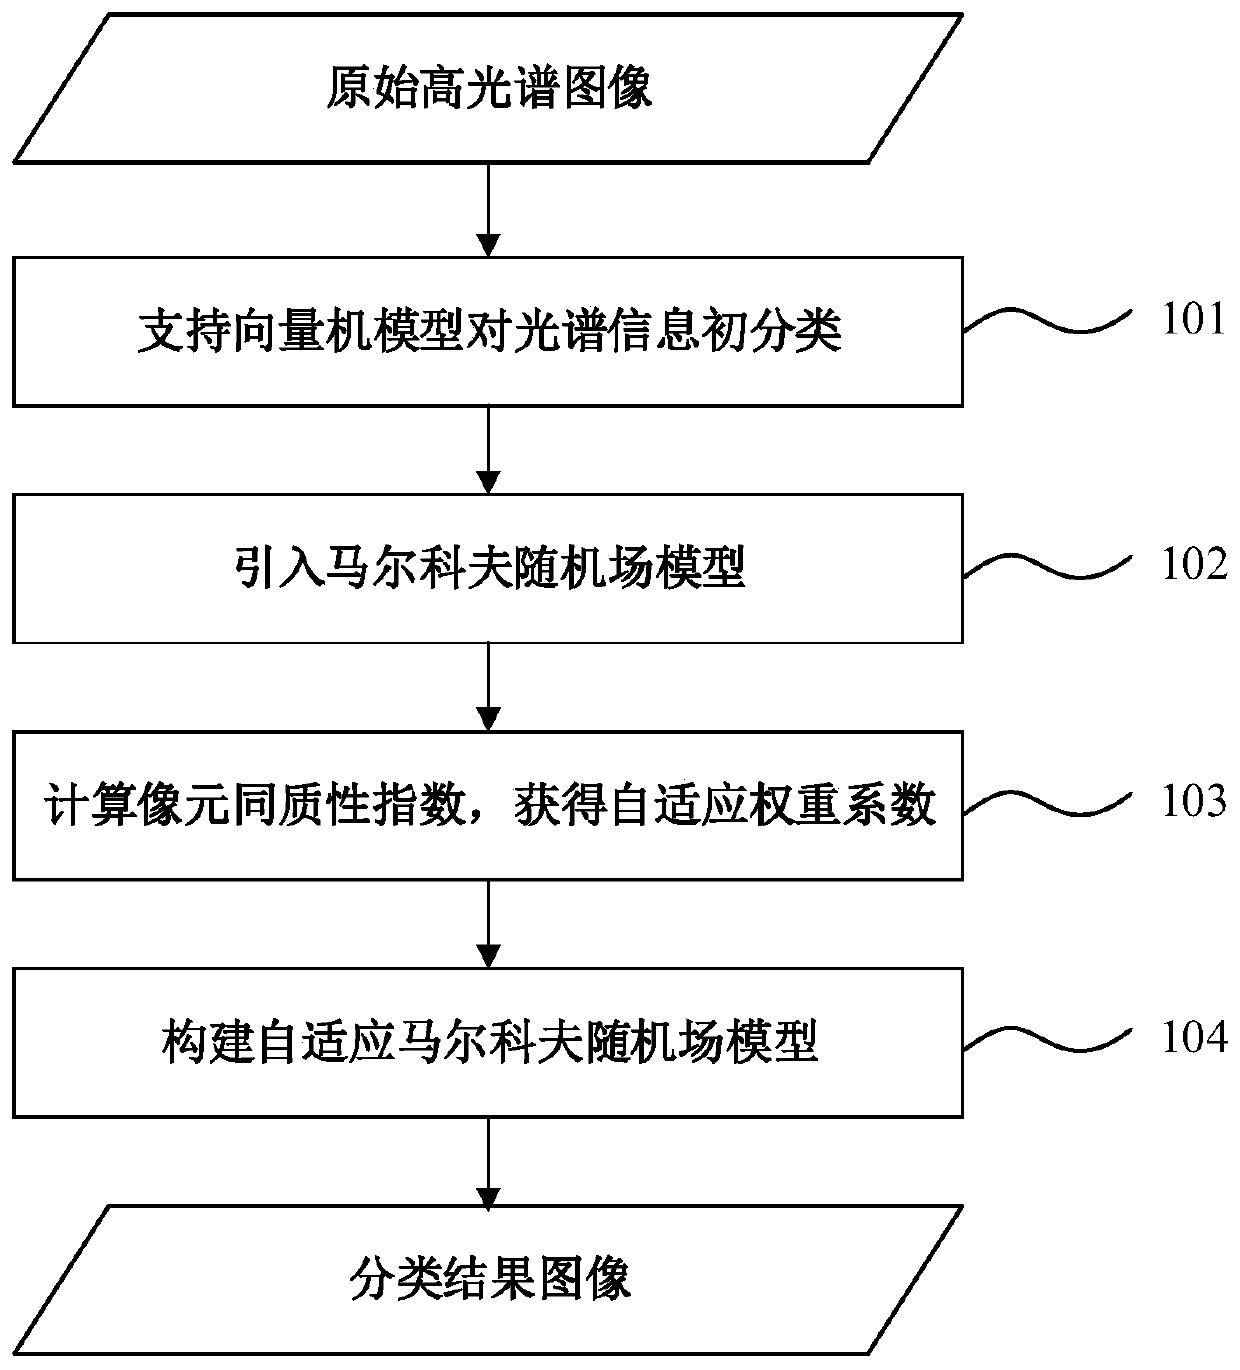 Hyperspectral image classification method based on spatial information adaptive processing